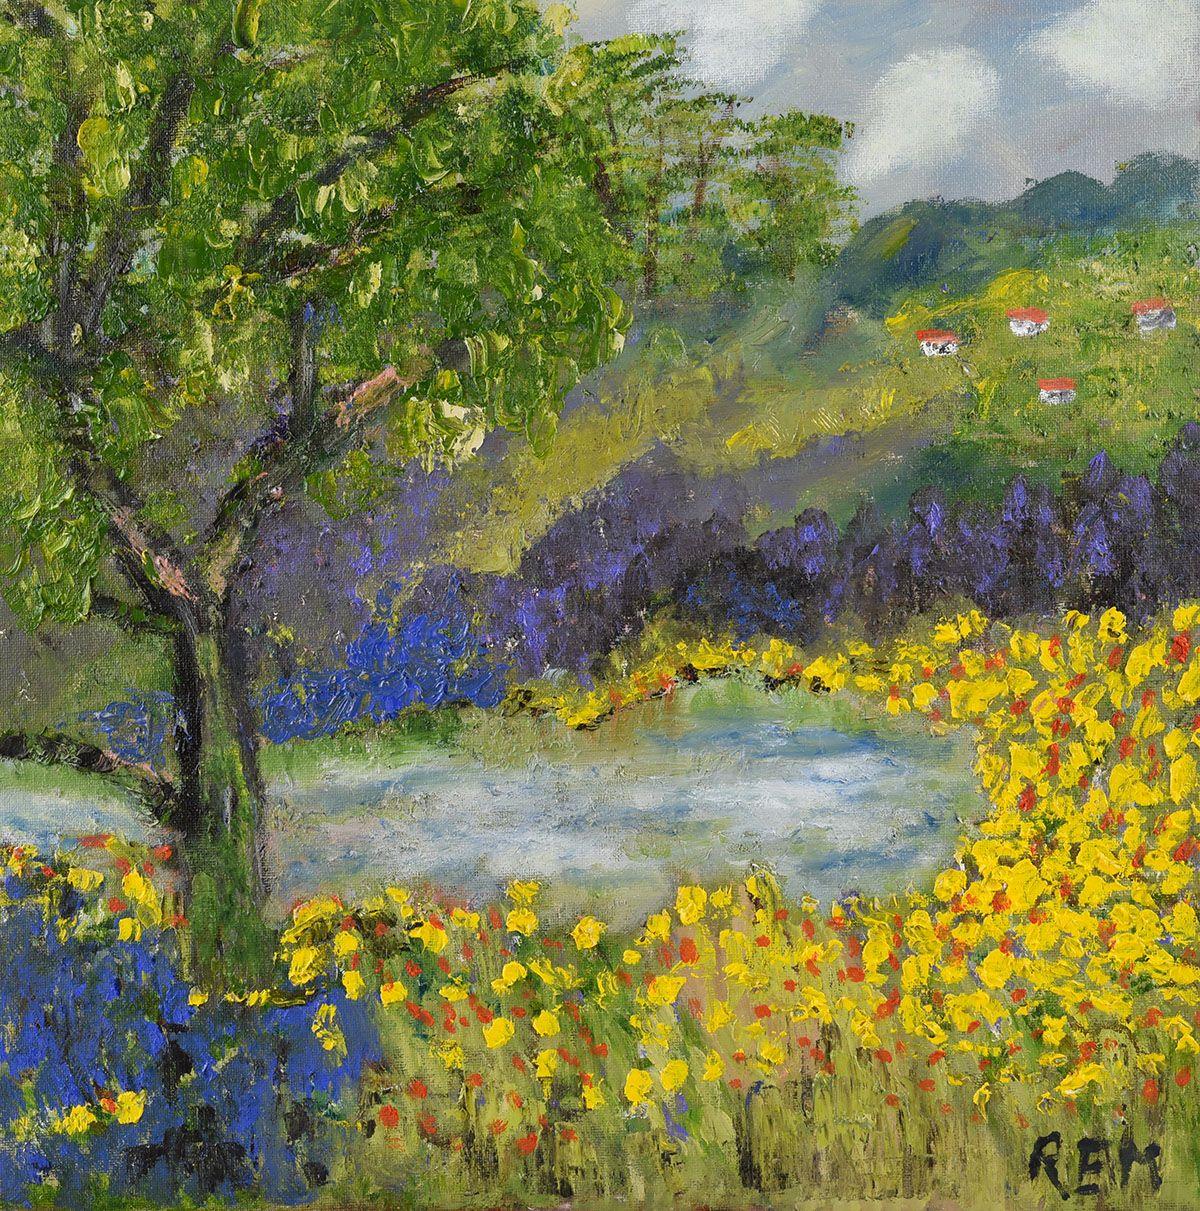 Spring Garden Abstract Landscape with Yellow Flowers and Tree by British Artist - Abstract Impressionist Painting by Rose Elizabeth Moorcroft